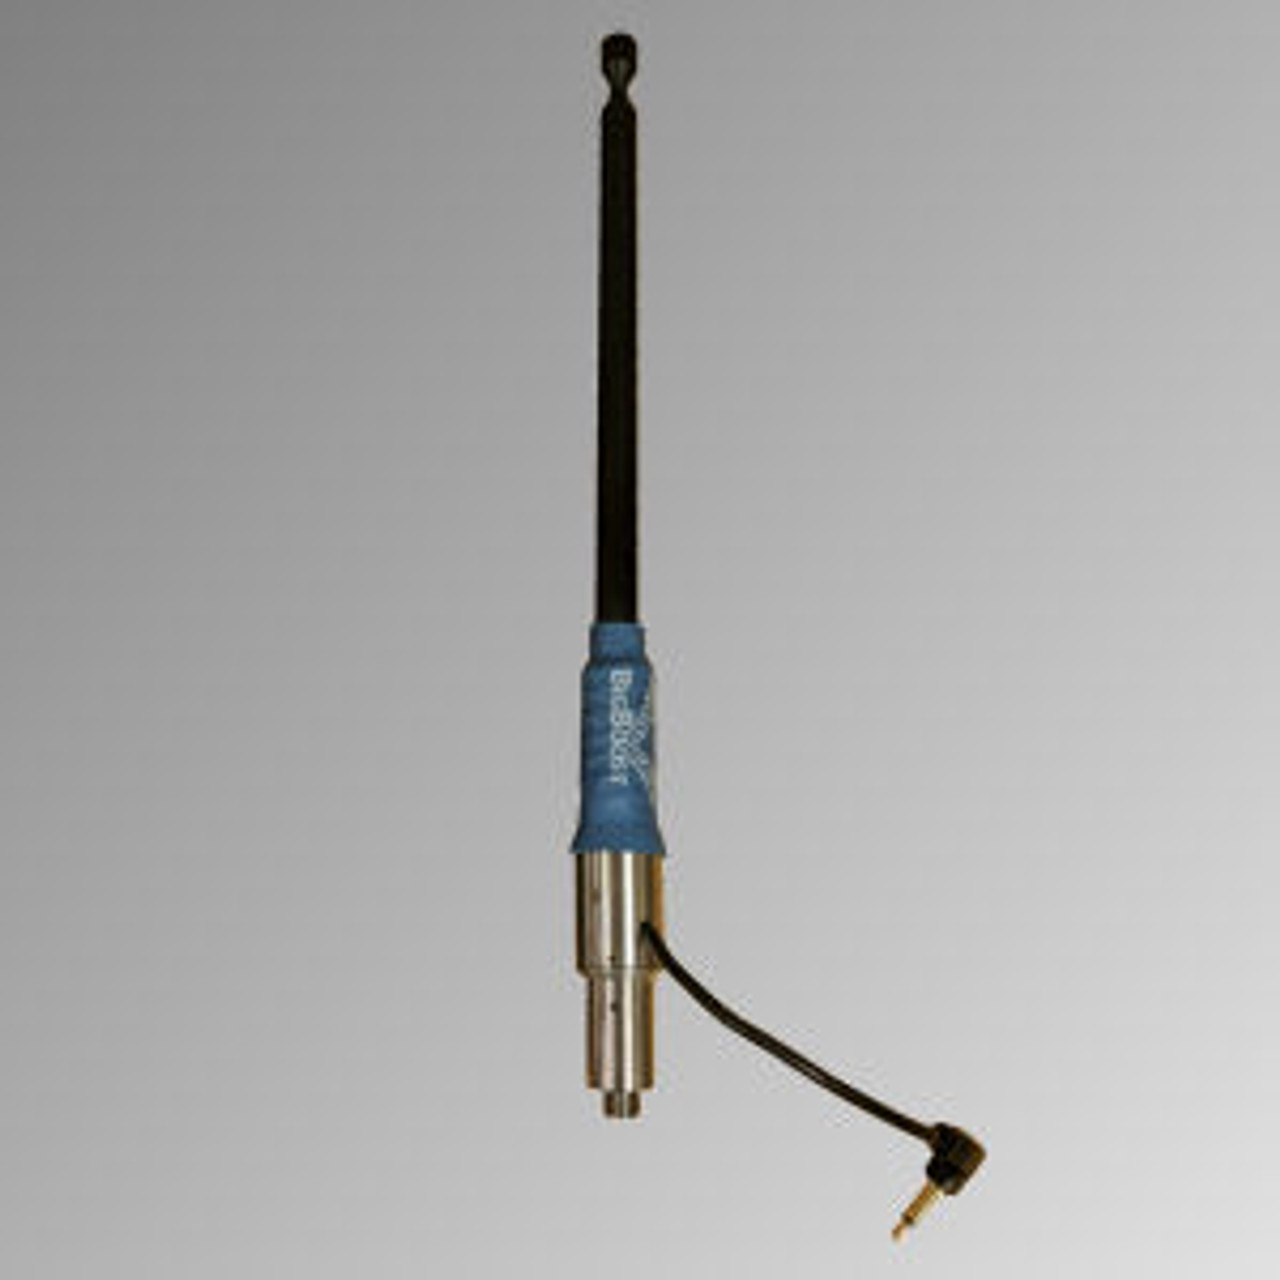 BigBoost Xtreme Series, 13dB Gain Extended Range Telescopic Antenna For  Bendix King LPH  - VHF, 167-173 MHz